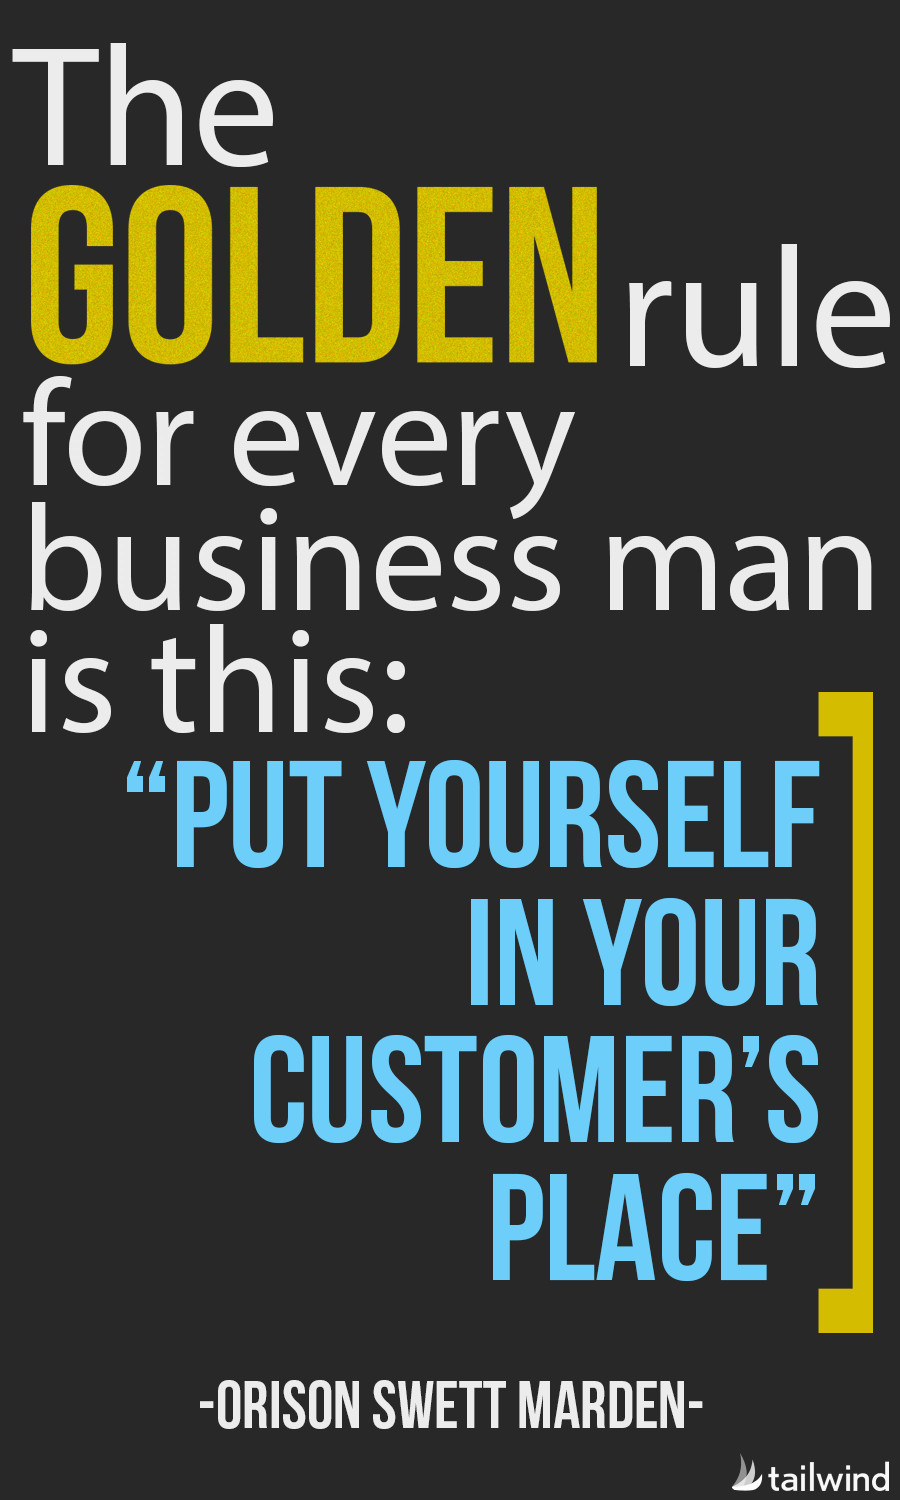 Motivational Quote Business
 36 of Our Favorite Business Quotes Tailwind Blog